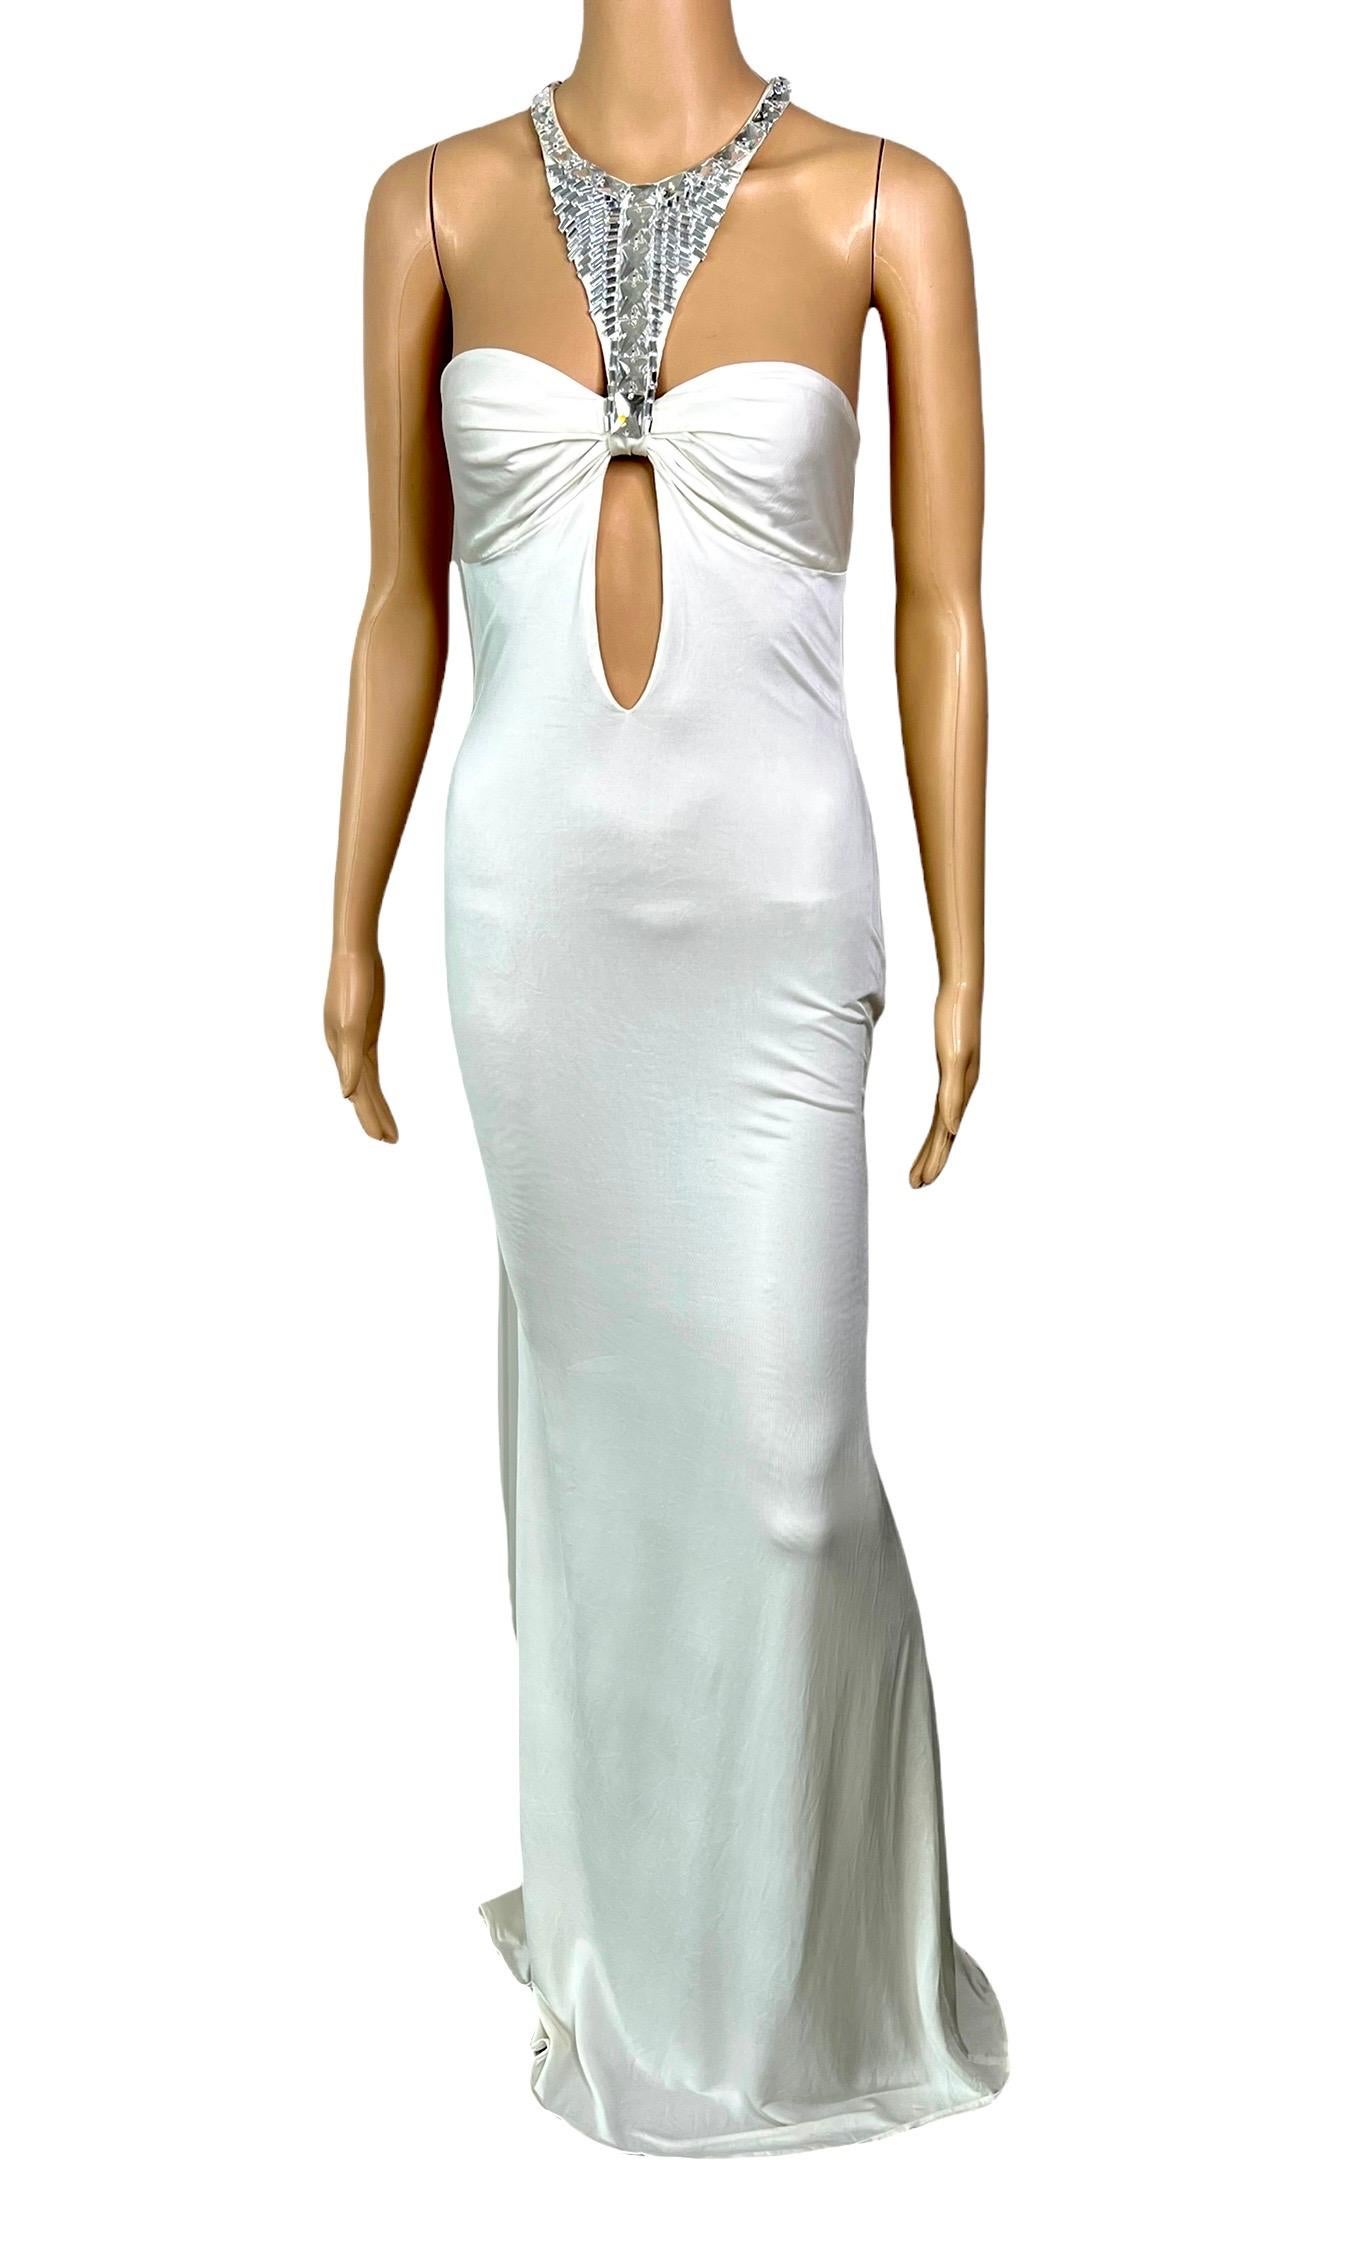 Tom Ford for Gucci F/W 2004 Embellished Plunging Cutout Ivory Evening Dress Gown For Sale 12